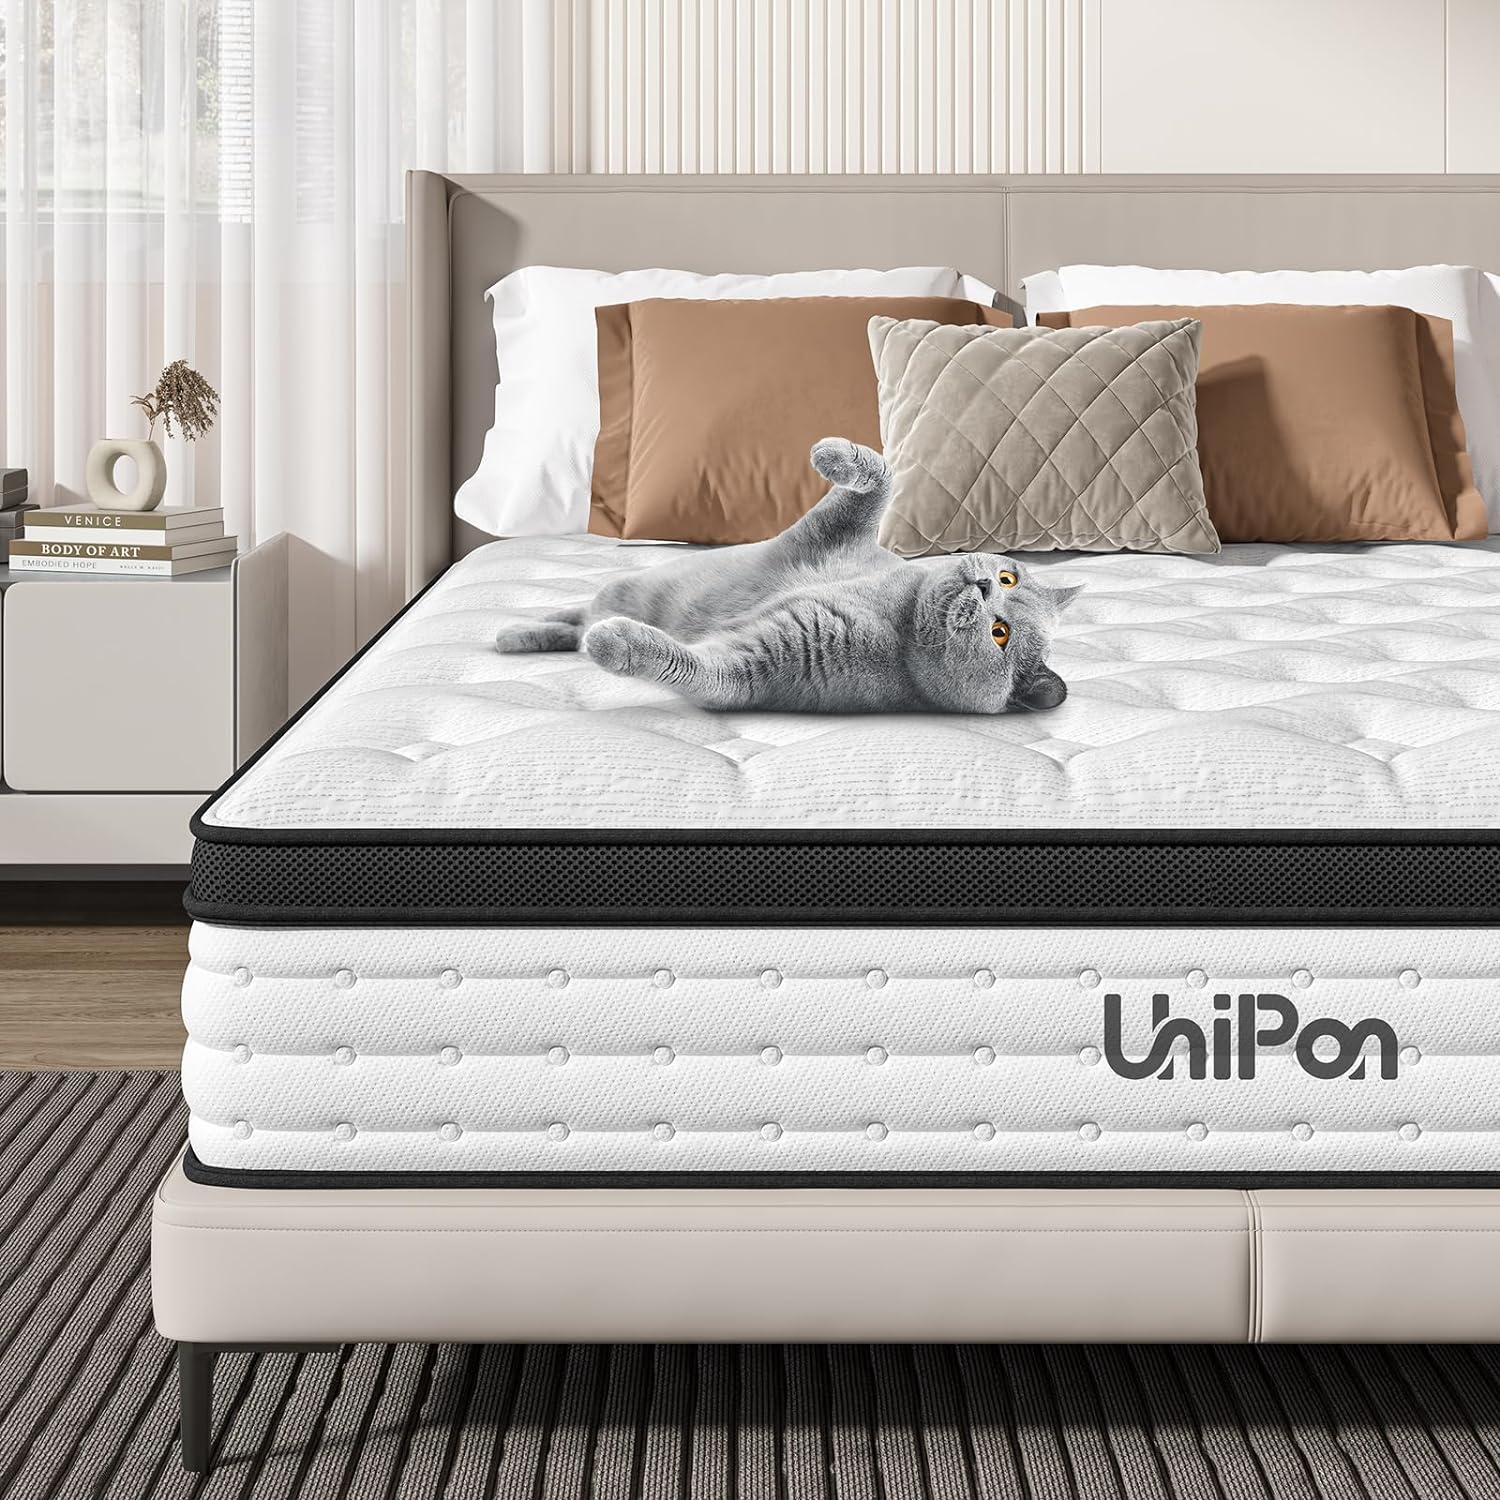 UniPon 10 Inch Hybrid Mattress Twin, Spring Mattress with Gel Memory Foam, Medium Firm Mattress, Made in USA, Supportive Individually Pocket Spring Mattress, Bed in a Box, Pressure Relief